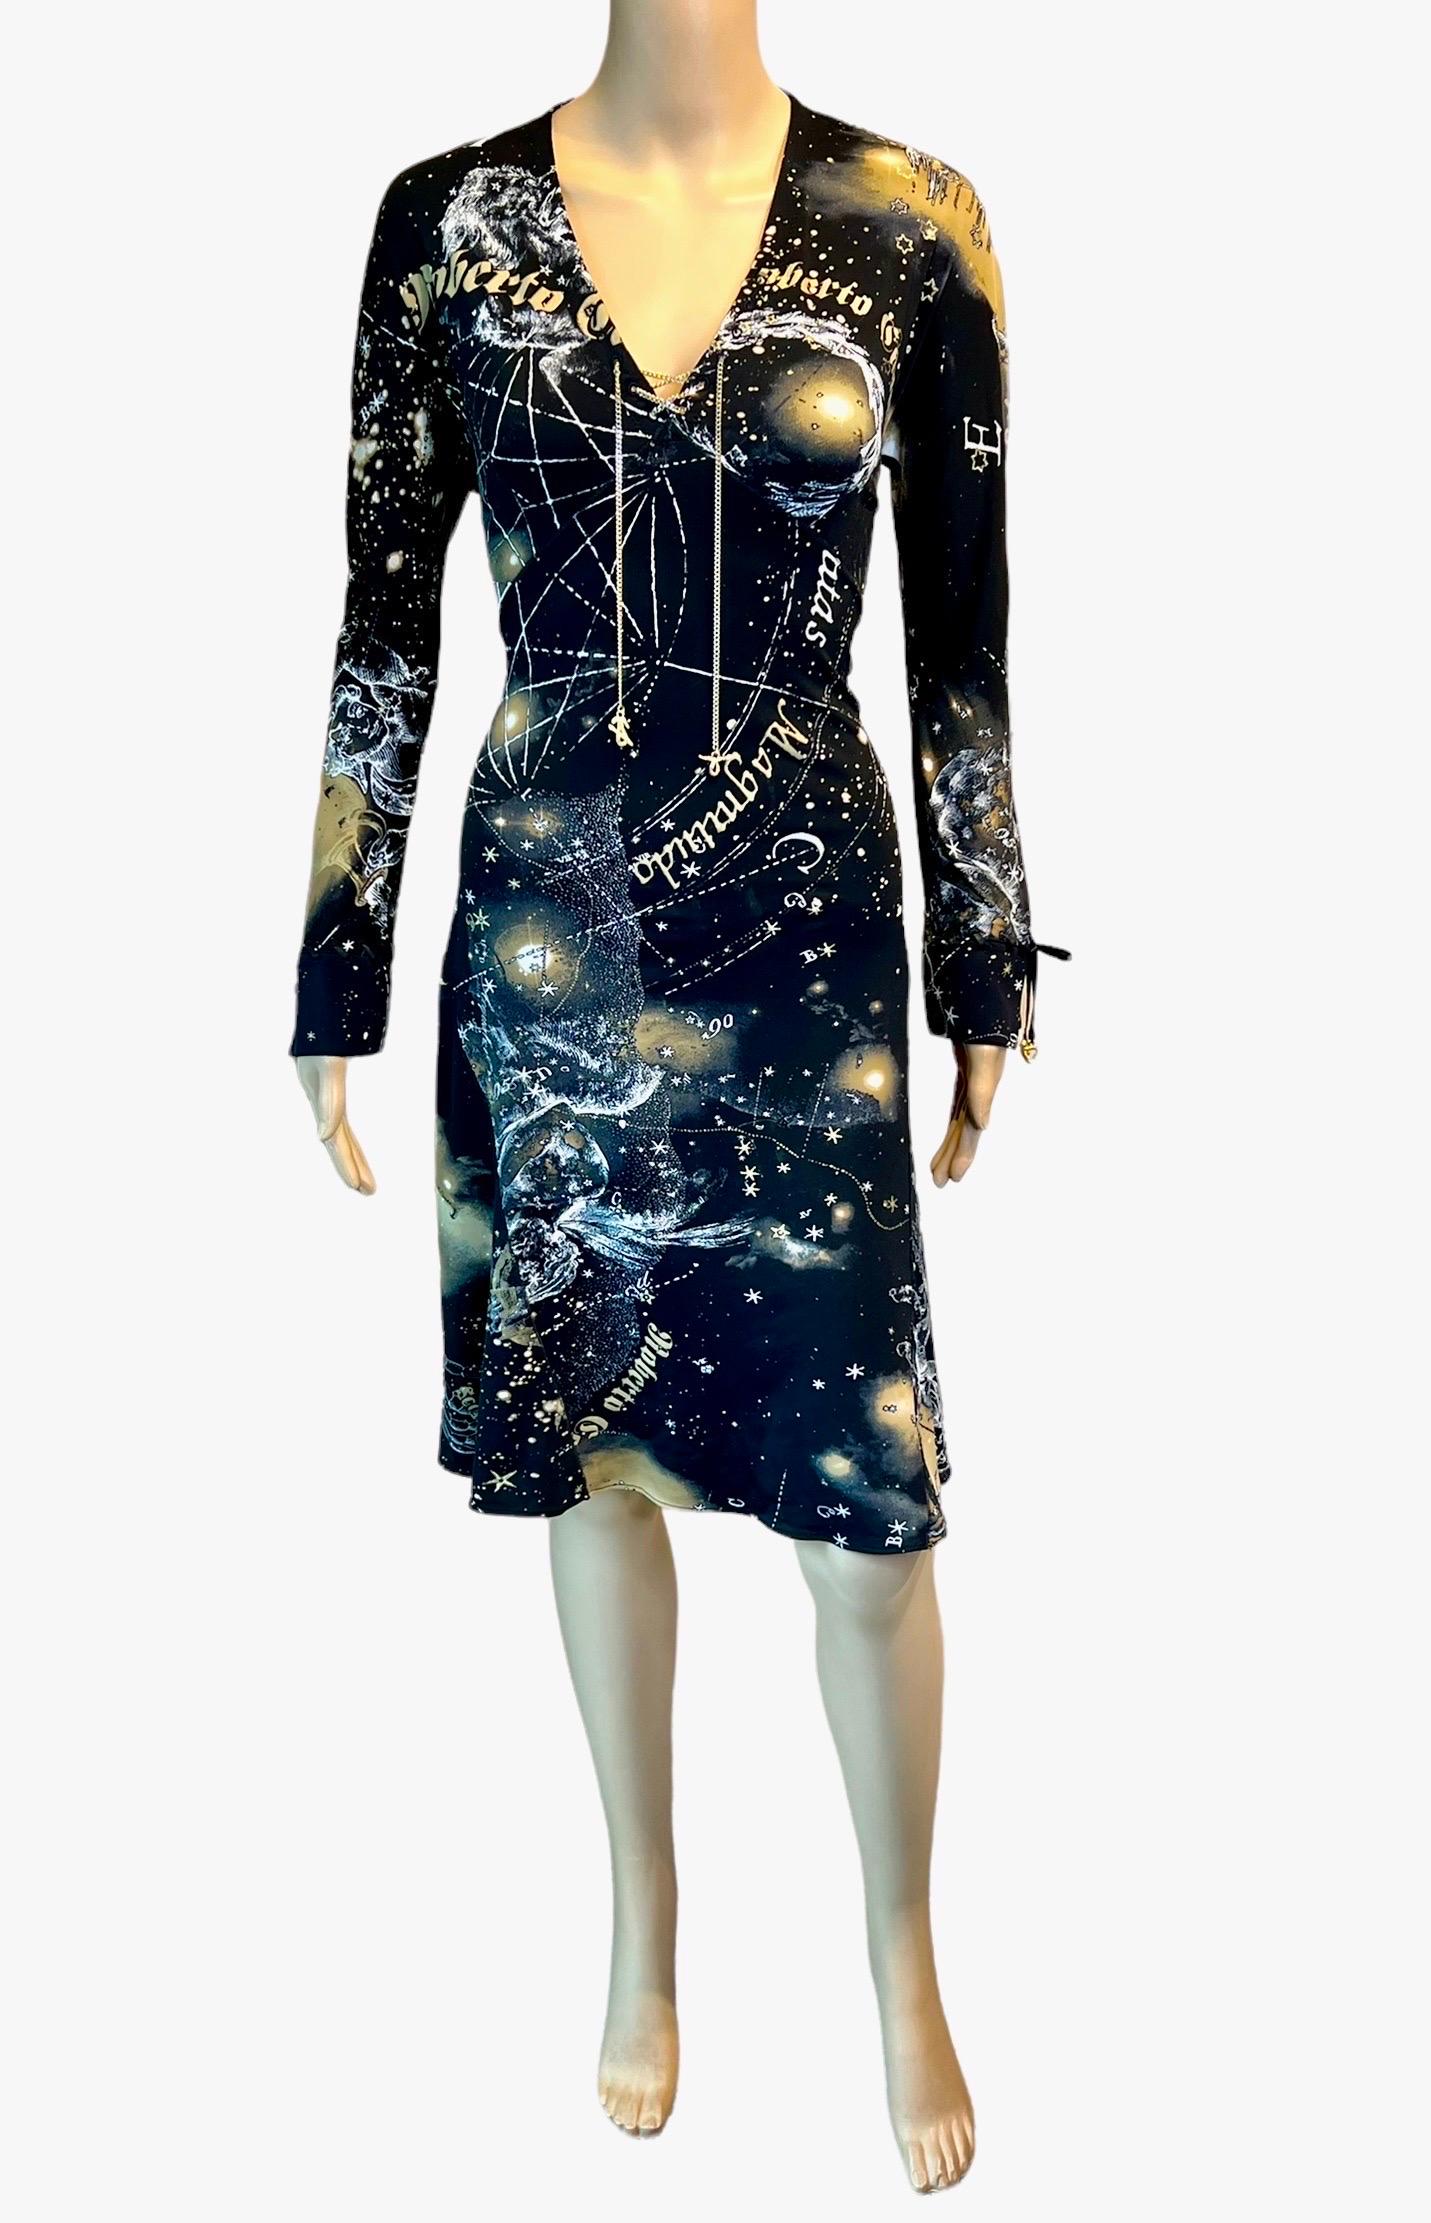 Roberto Cavalli F/W 2003 Lace Up Chain Constellation Astrology Print Dress In Good Condition For Sale In Naples, FL